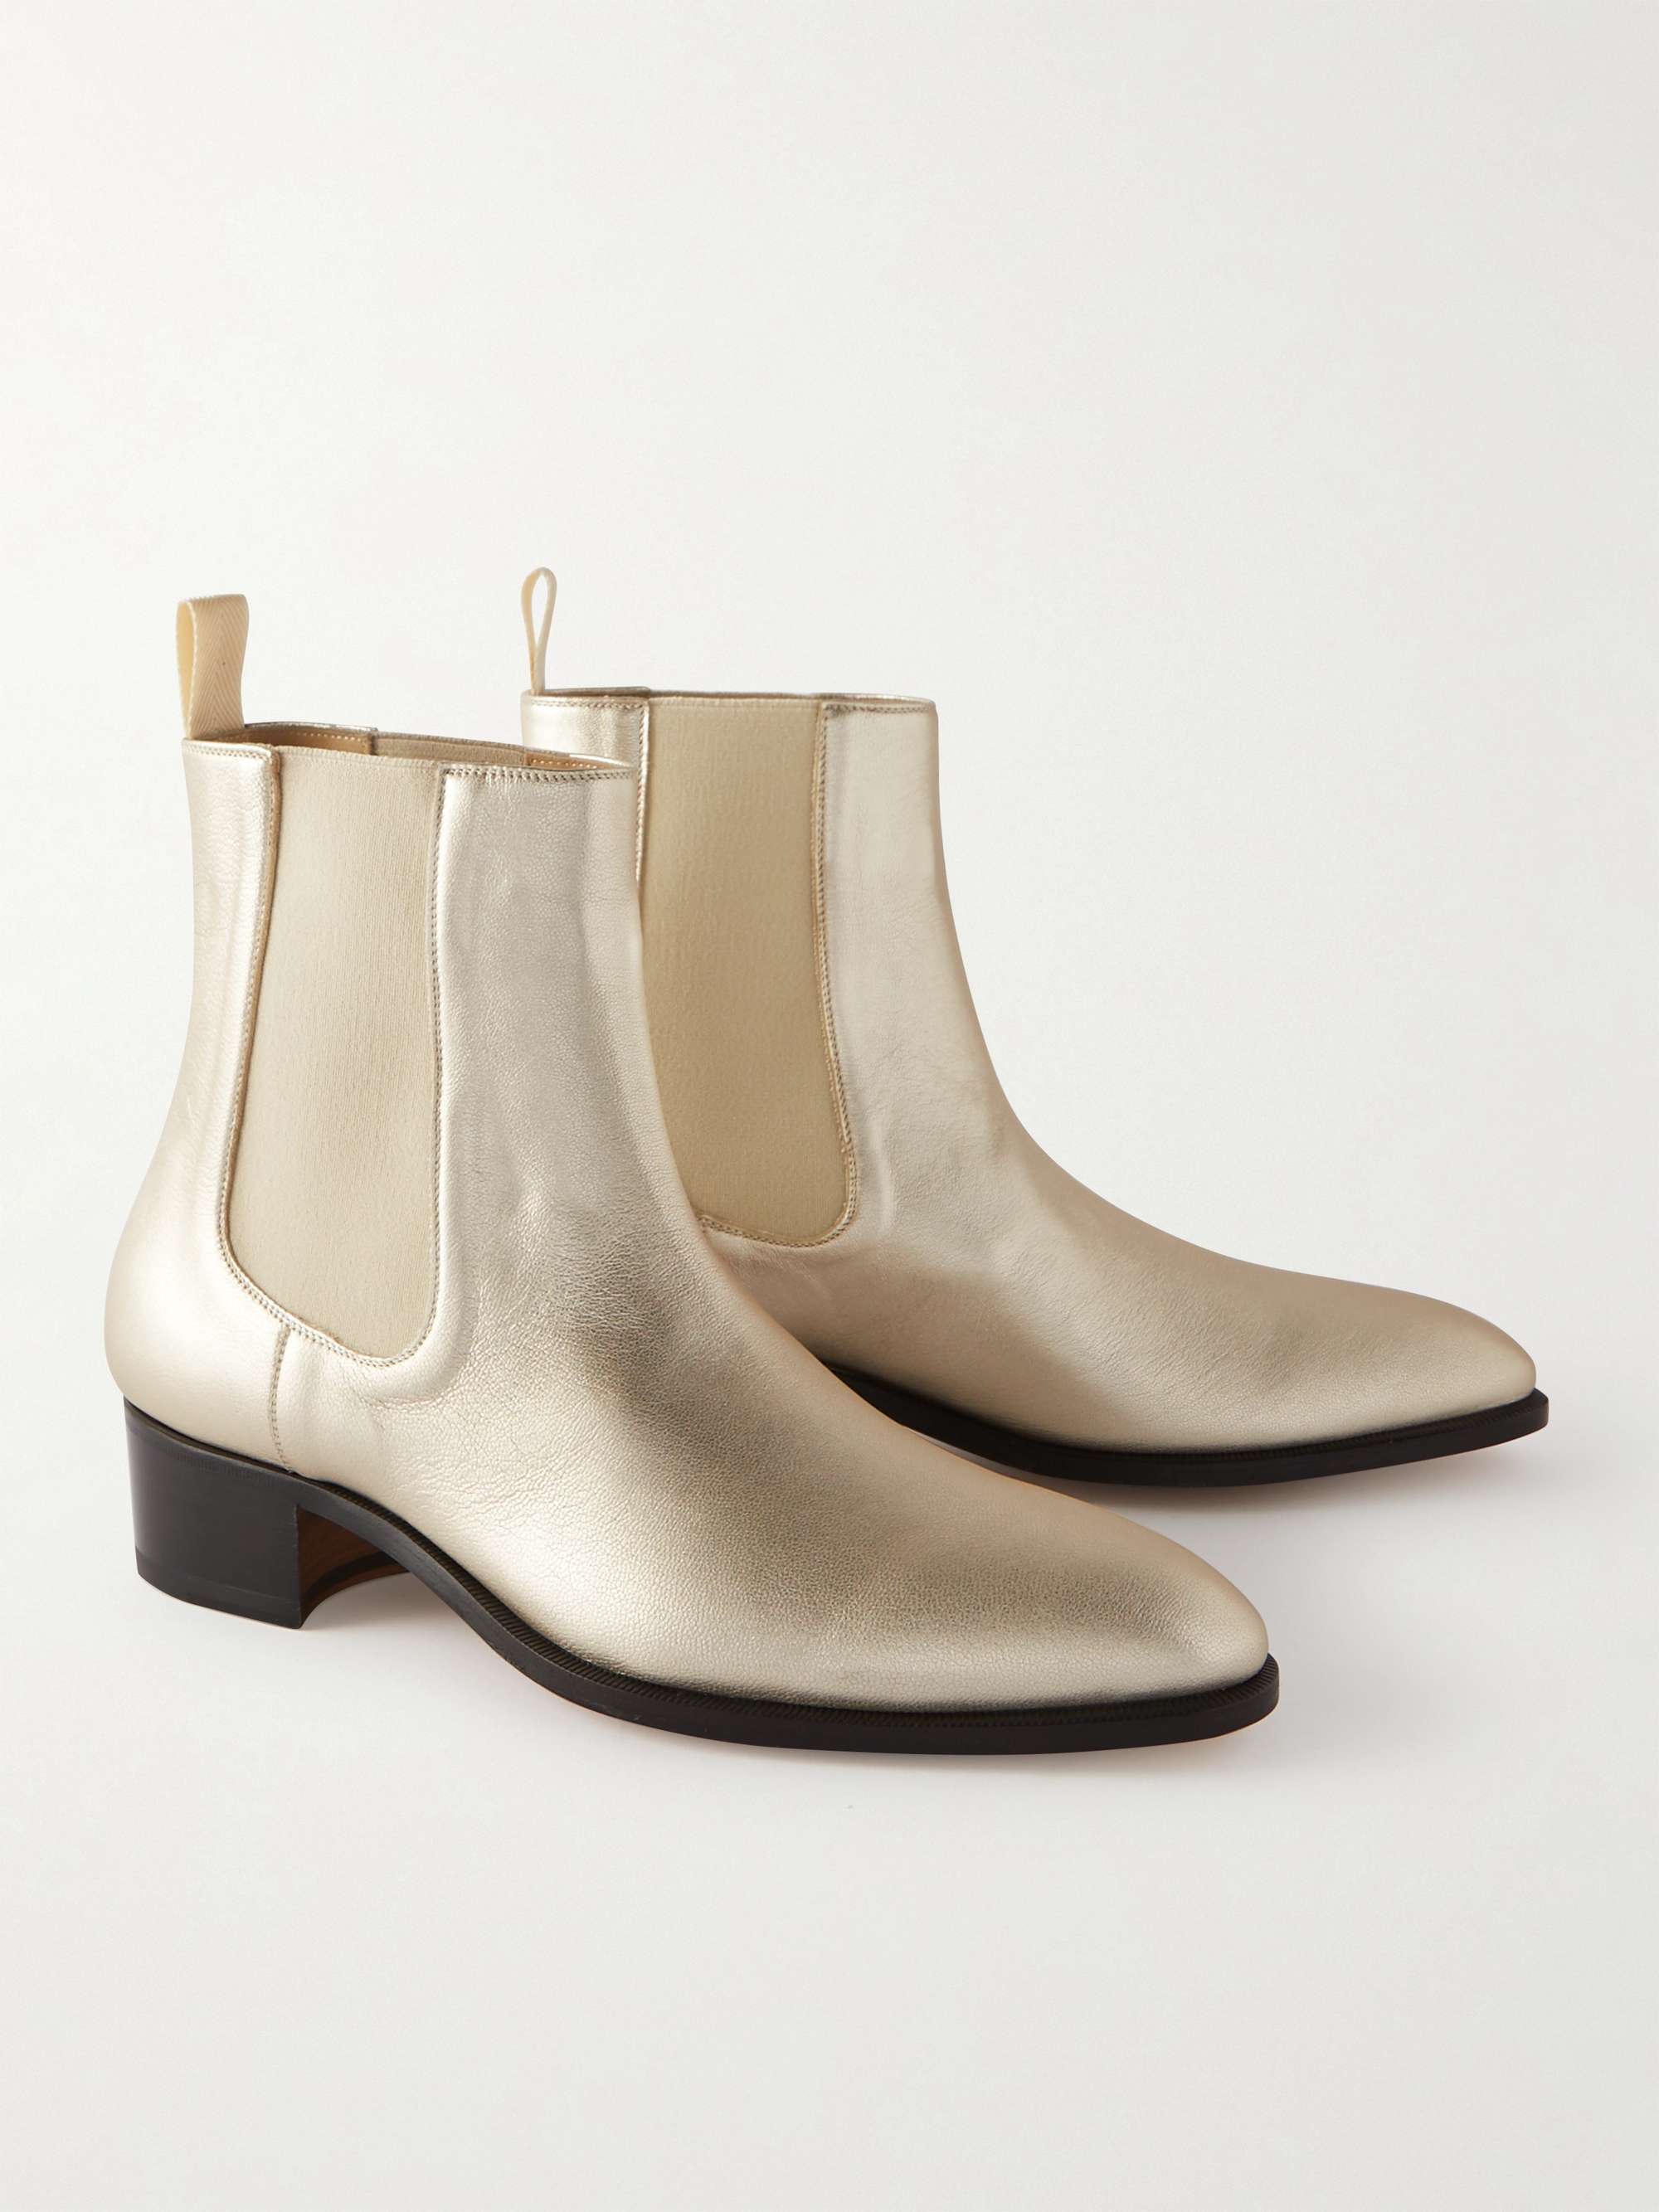 TOM FORD Metallic Leather Chelsea Boots